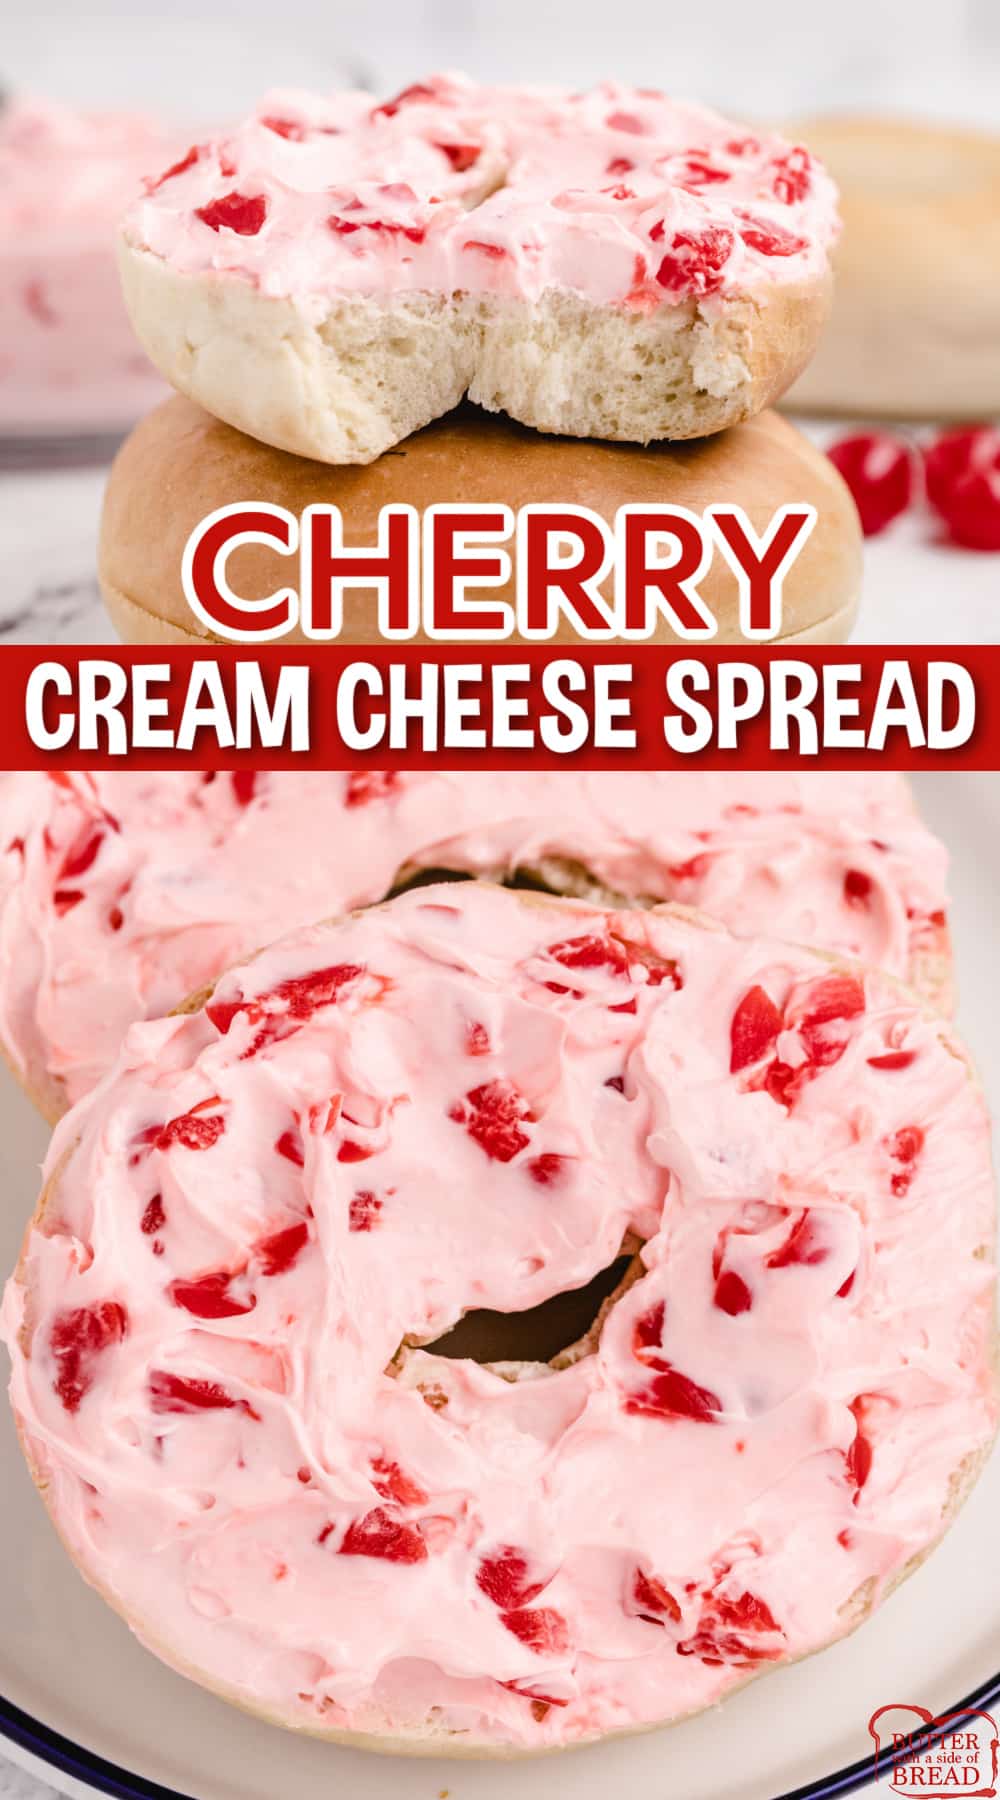 Cherry Cream Cheese Spread is a delicious recipe that is made in 5 minutes and with only 5 simple ingredients! This cream cheese maraschino cherry spread is perfect on bagels or toast.